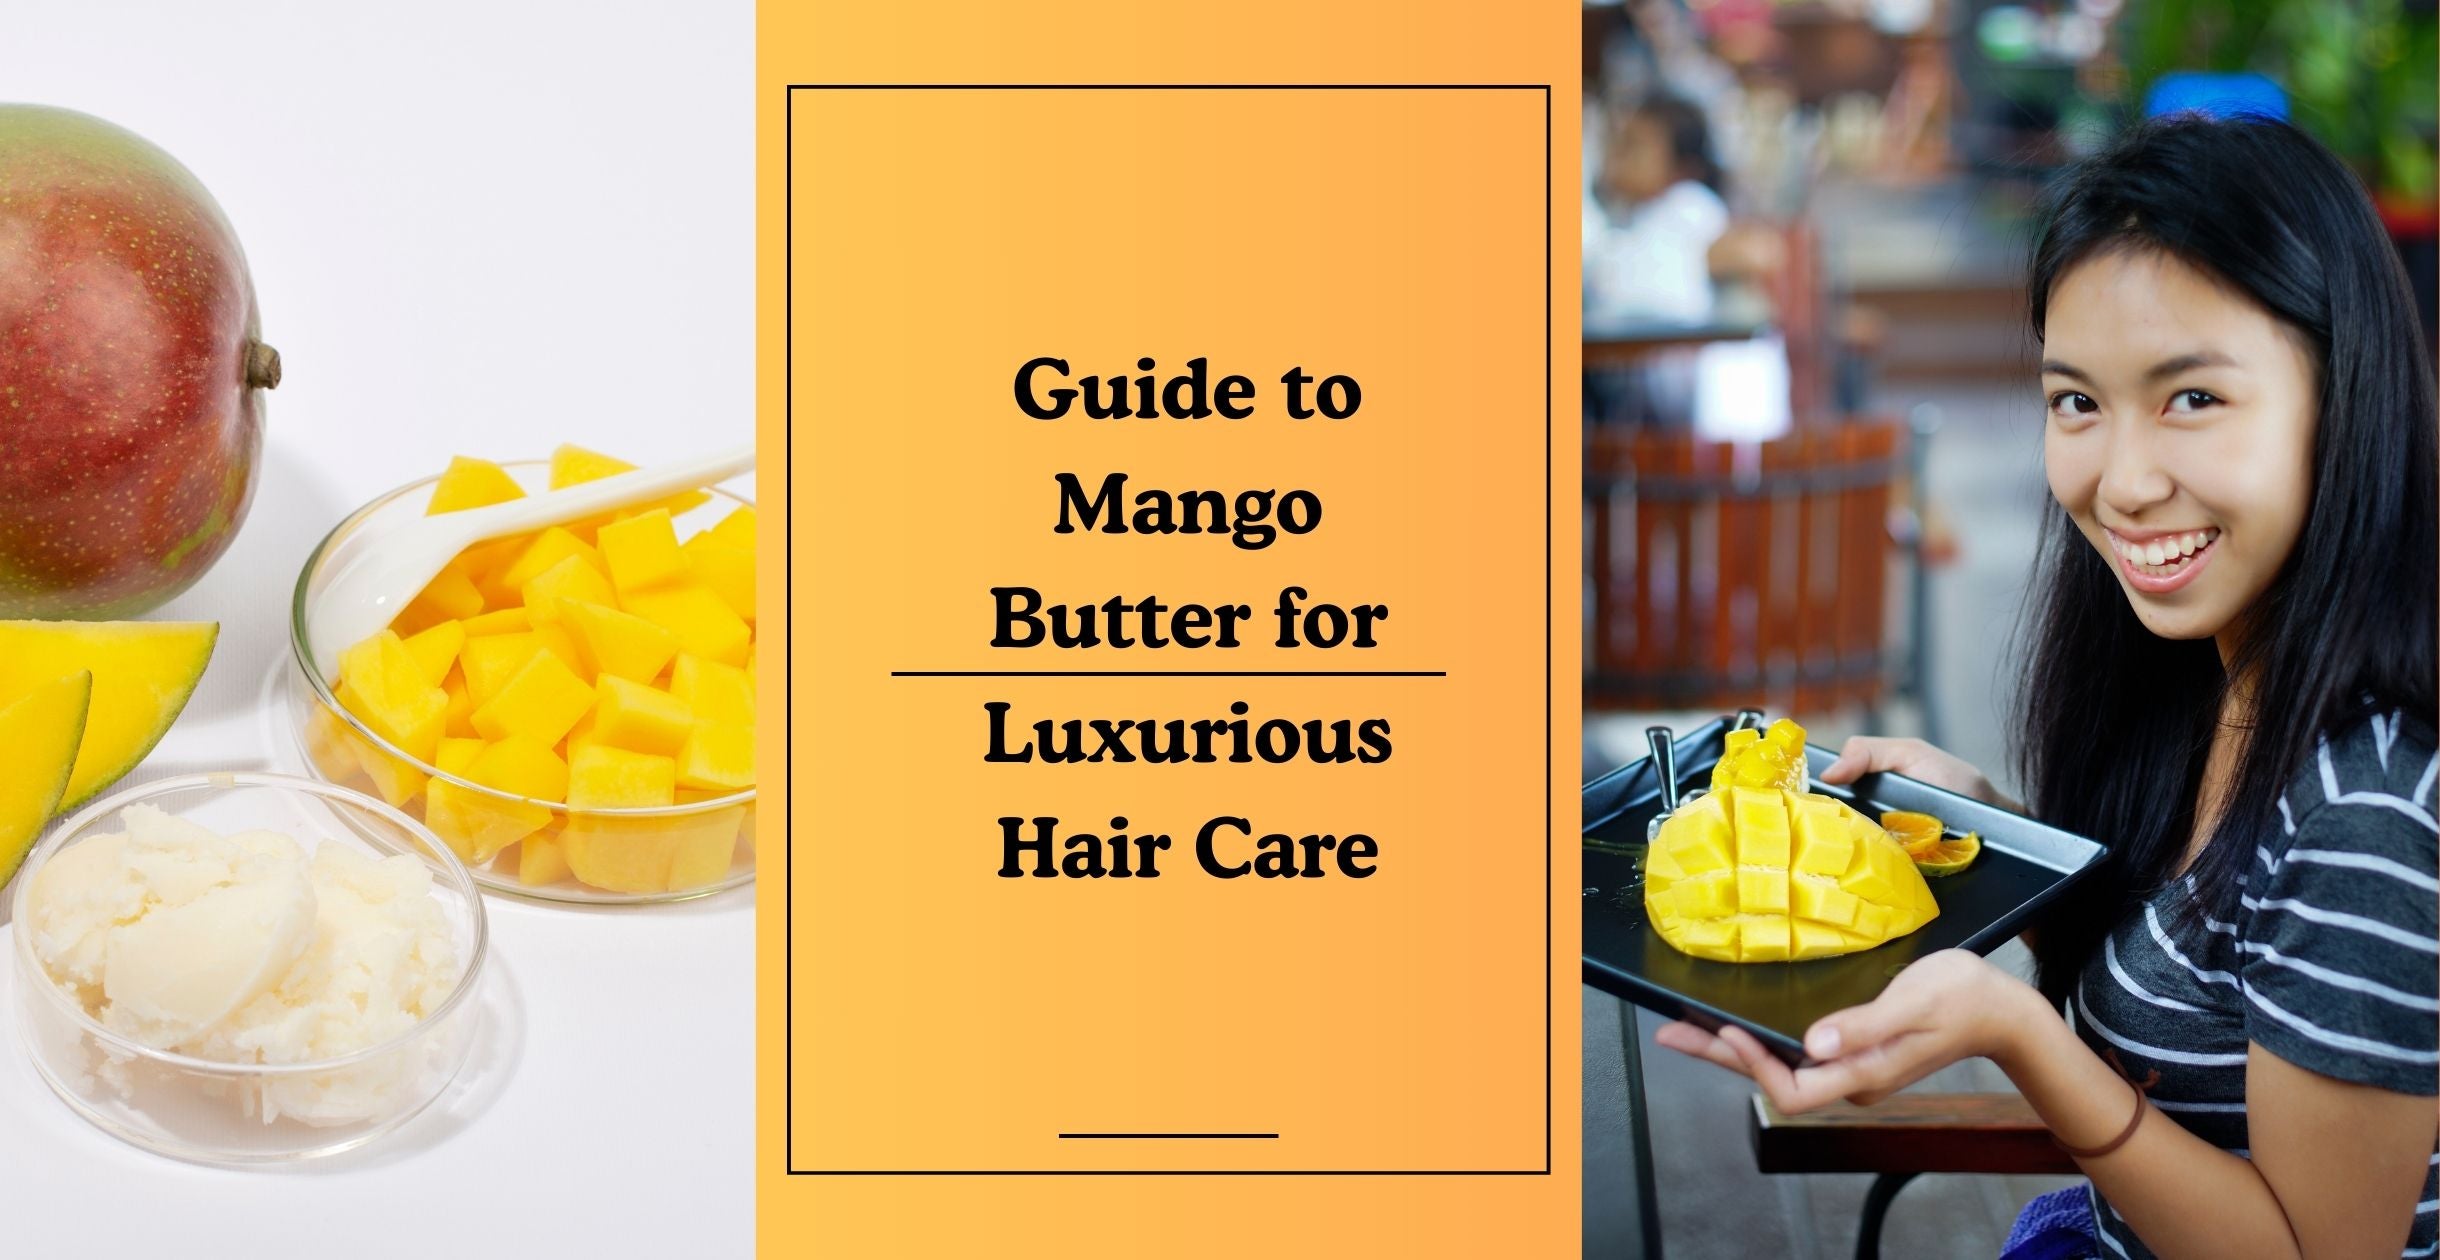 Guide to Mango Butter for Luxurious Hair Care